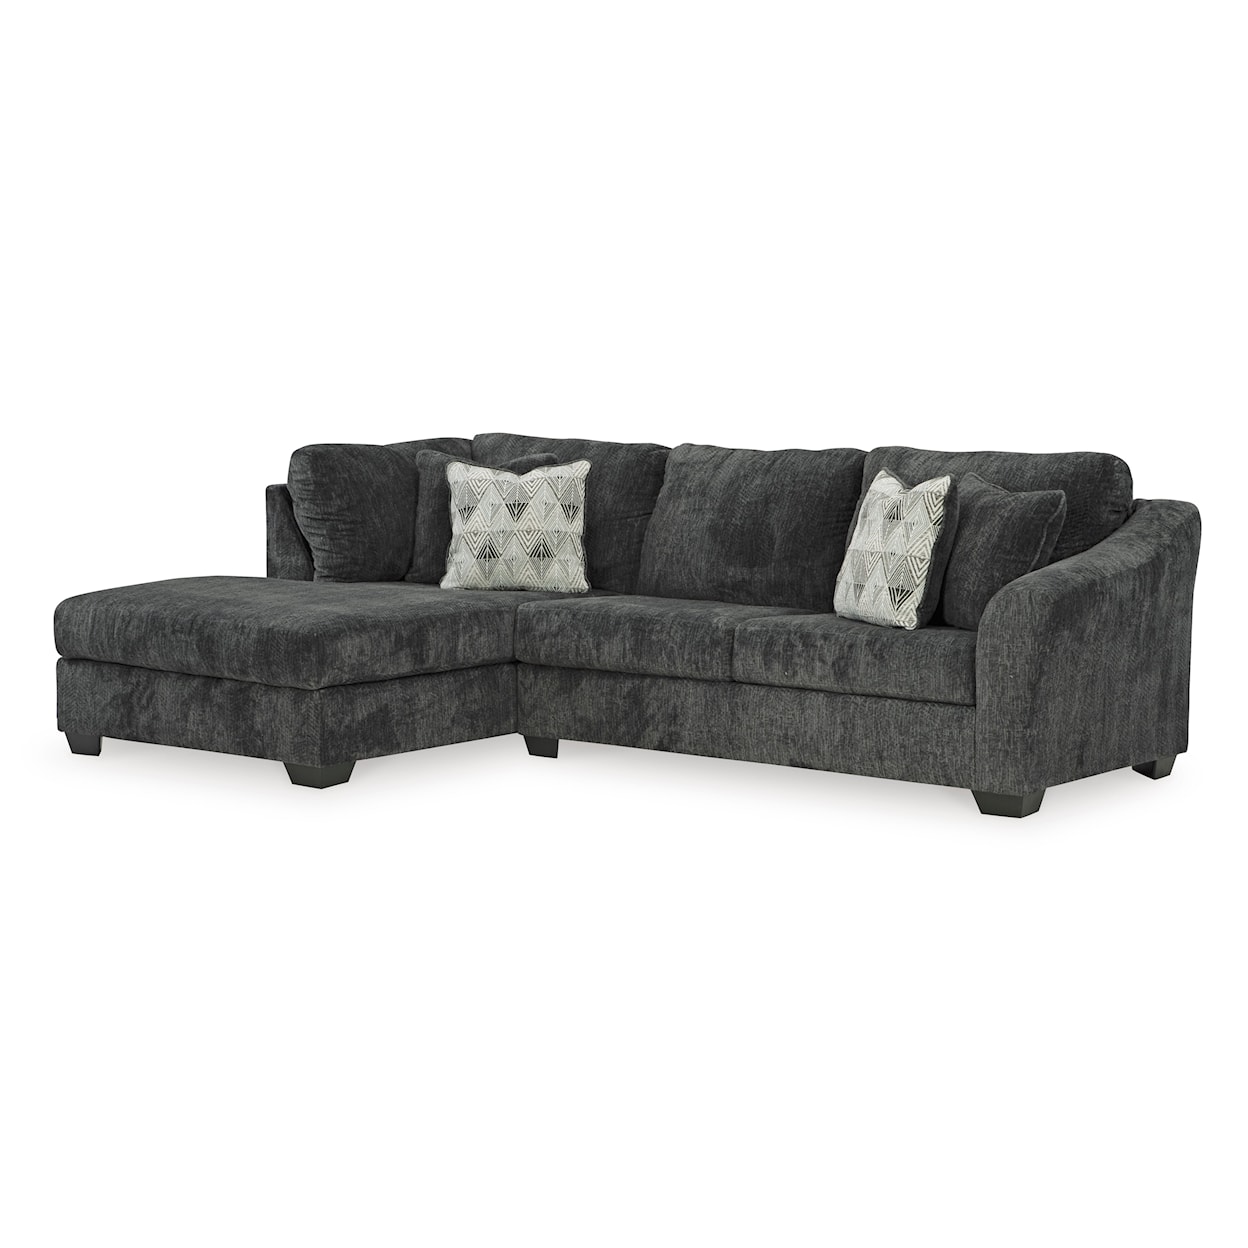 Signature Design by Ashley Biddeford 2-Piece Sectional with Chaise